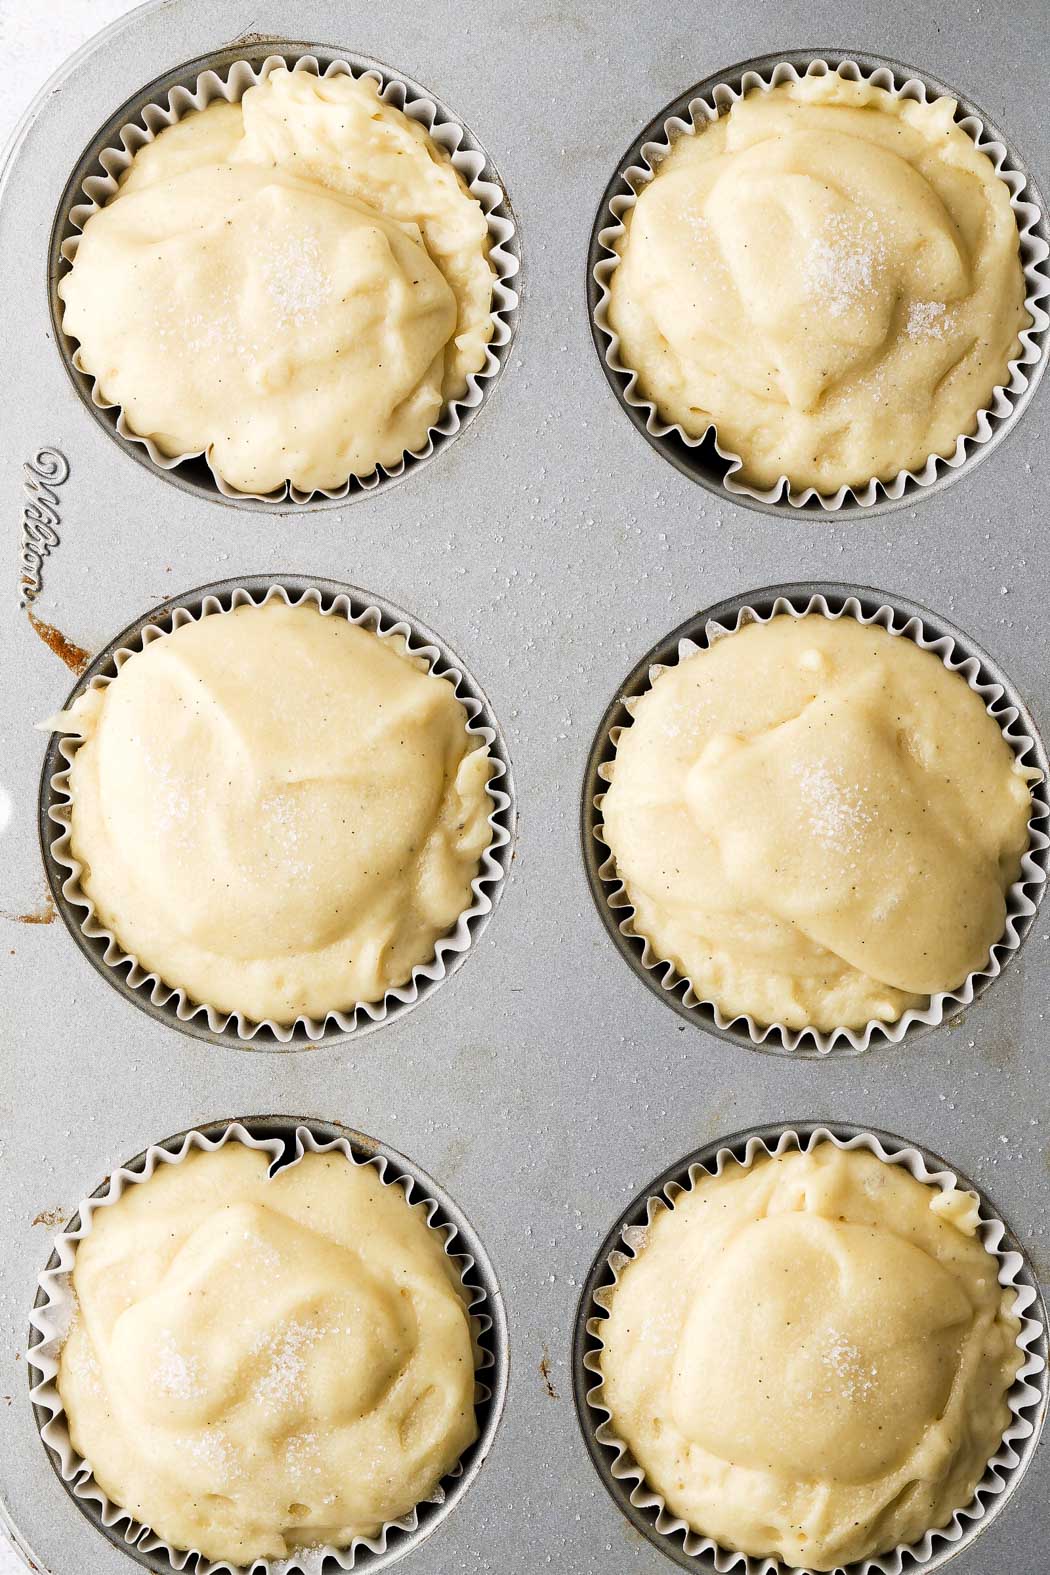 fill muffin tins all the way and top with sugar